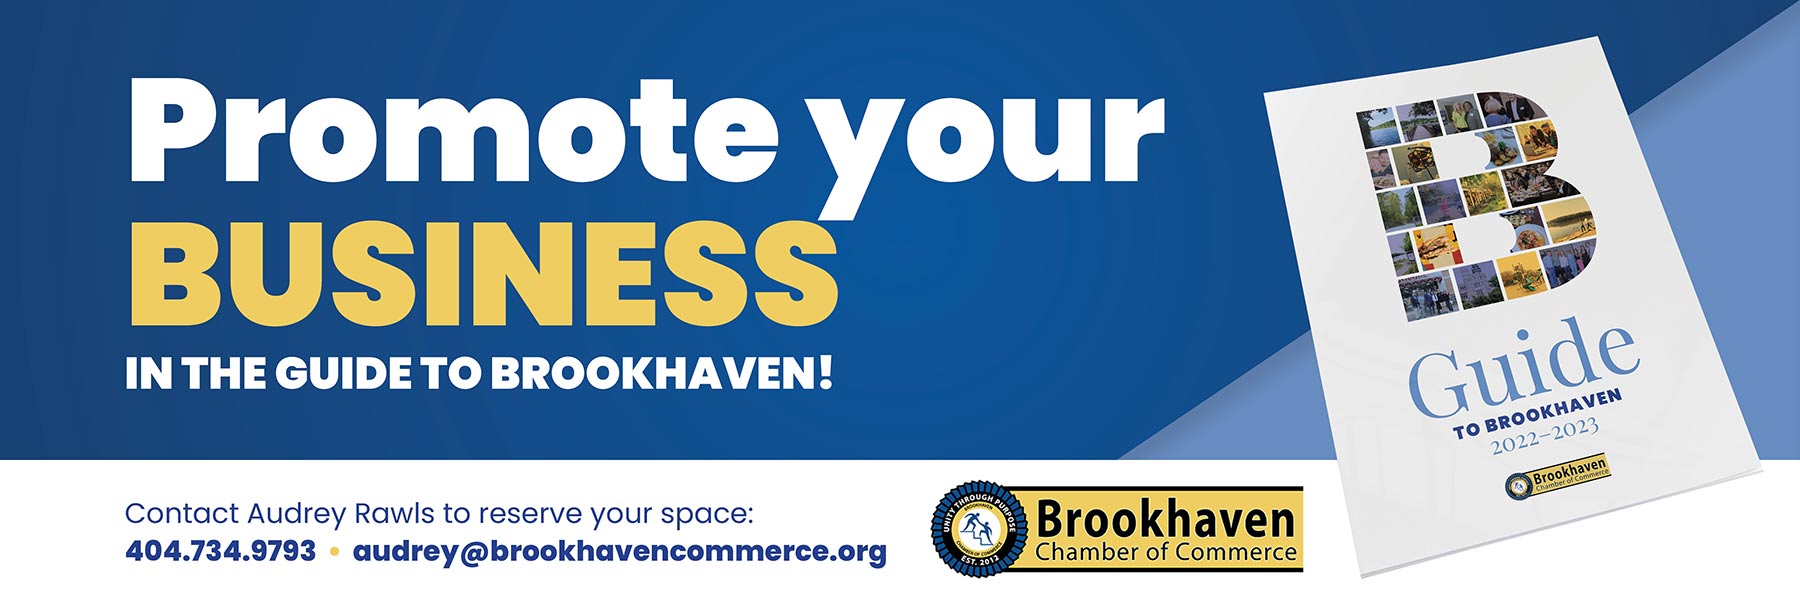 Brookhaven-Promote-Your-Business